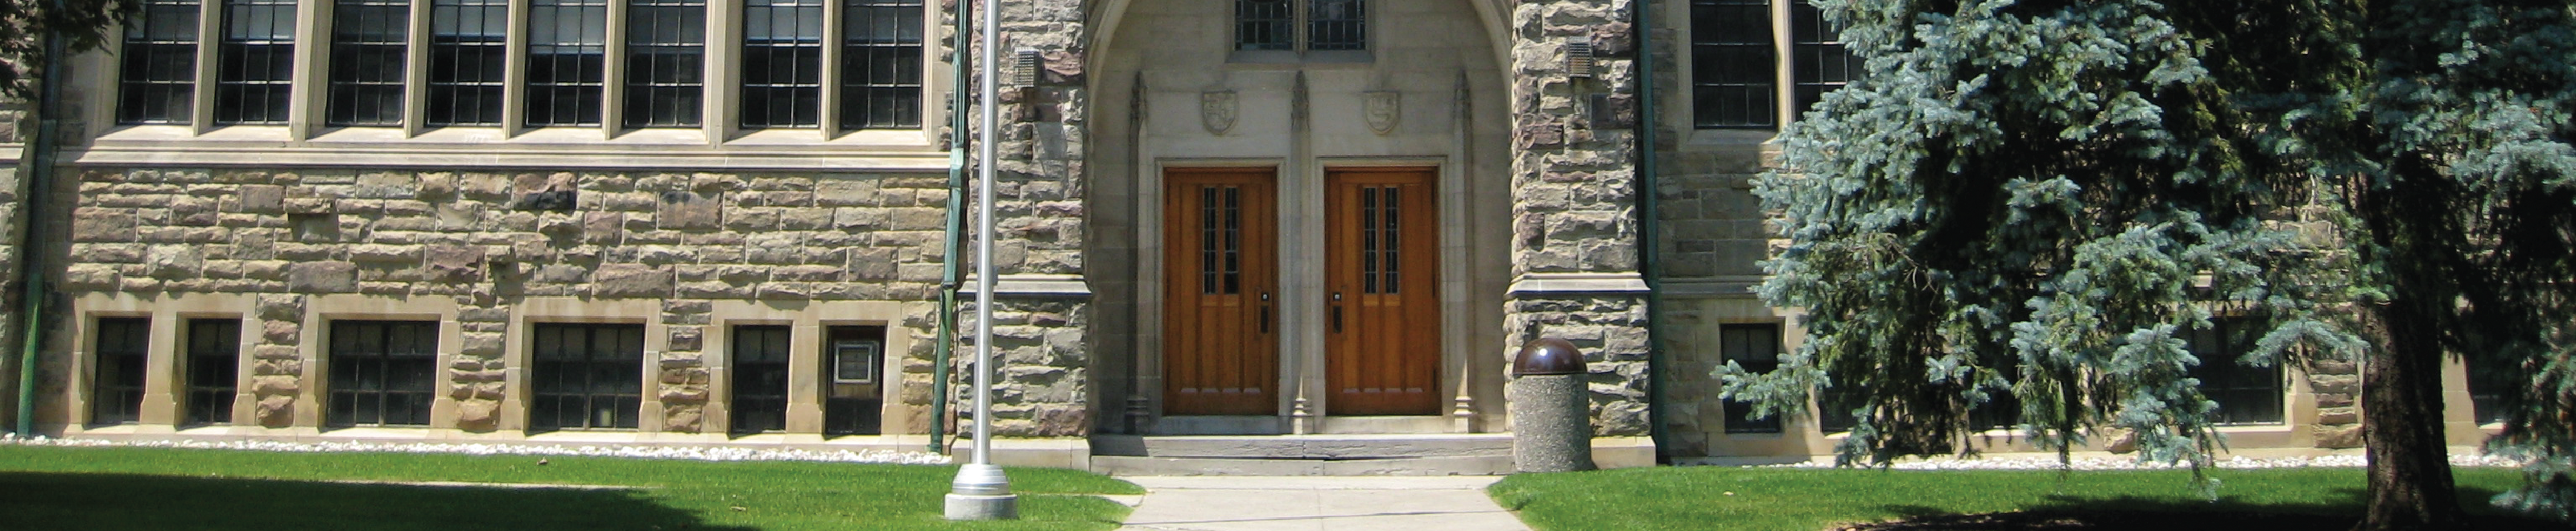 The front entrance of Loretto Abbey Catholic Secondary School.